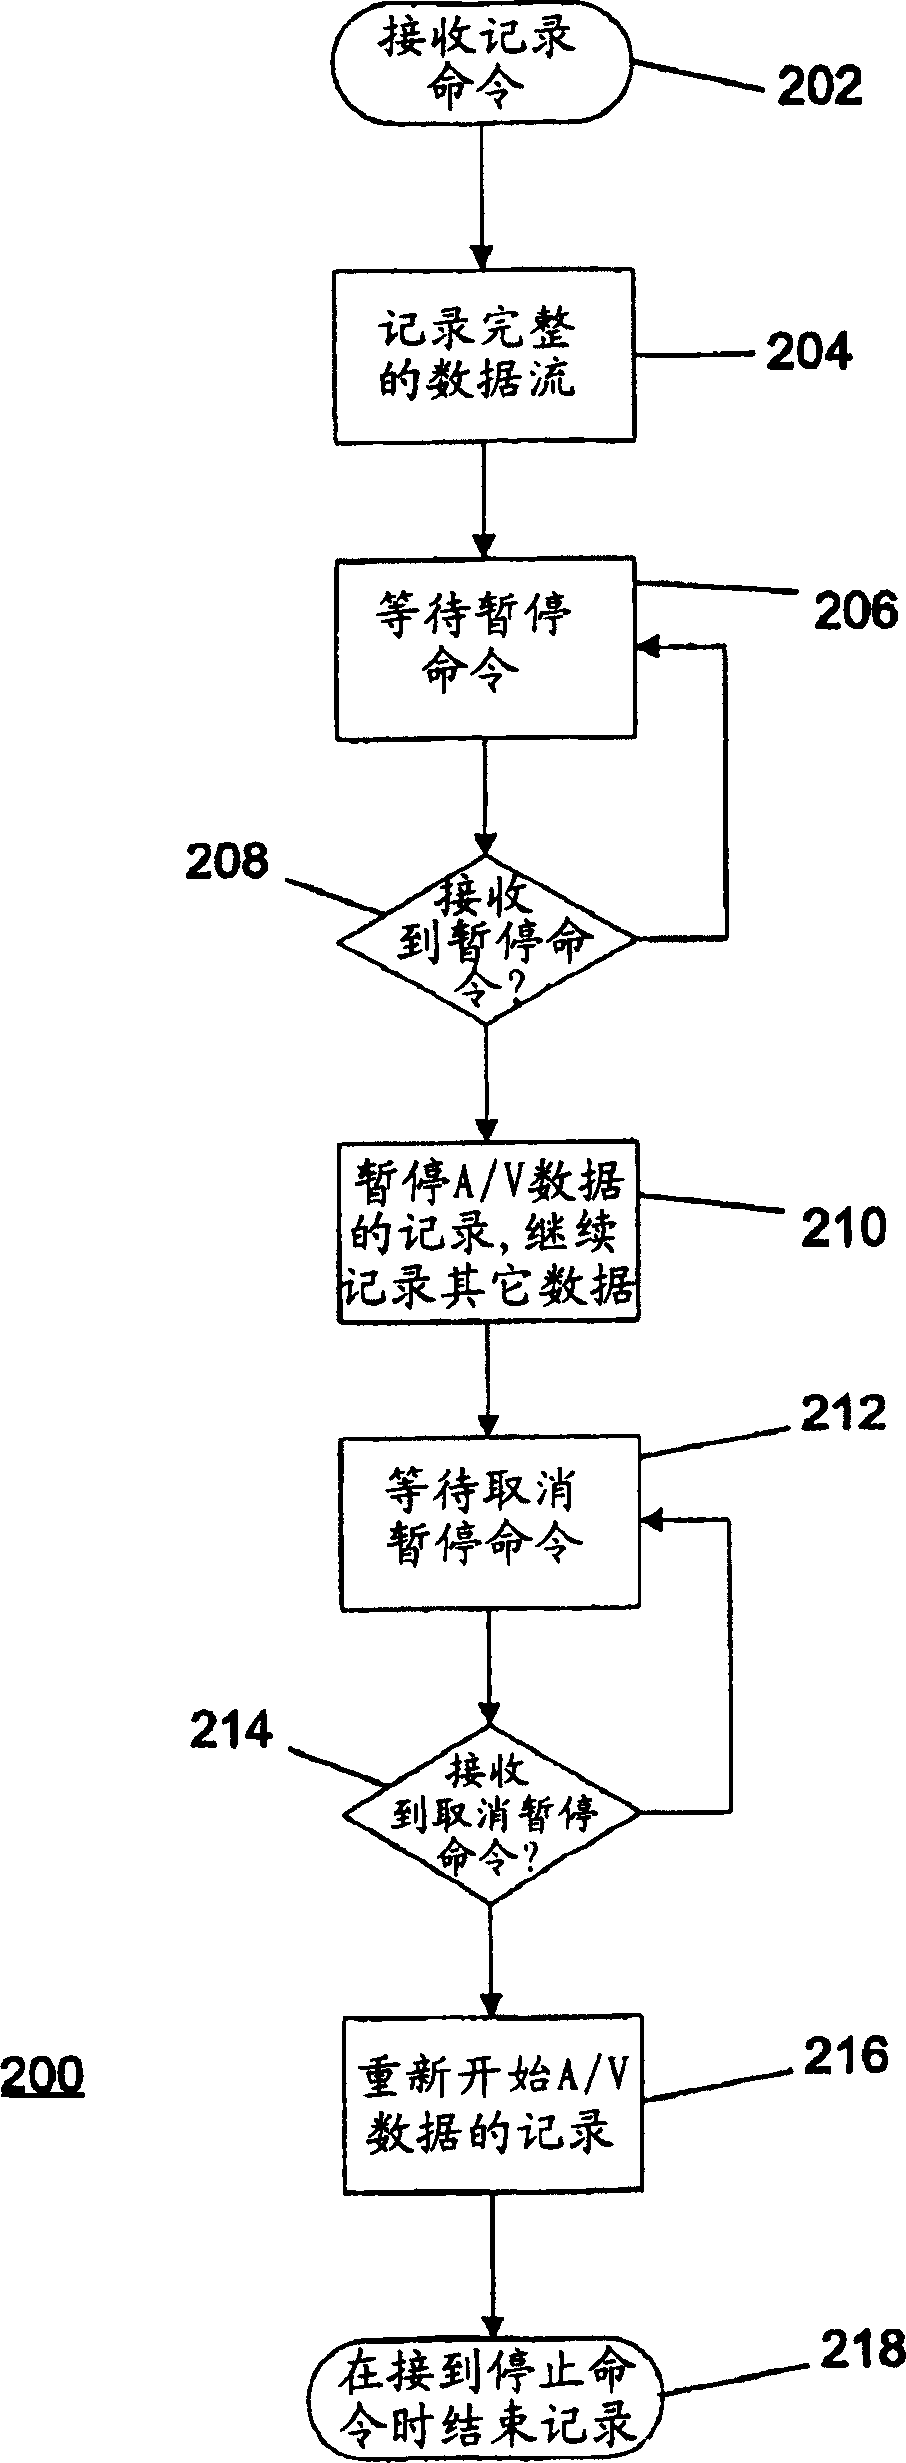 Method and apparatus for storing a stream of data received from a source